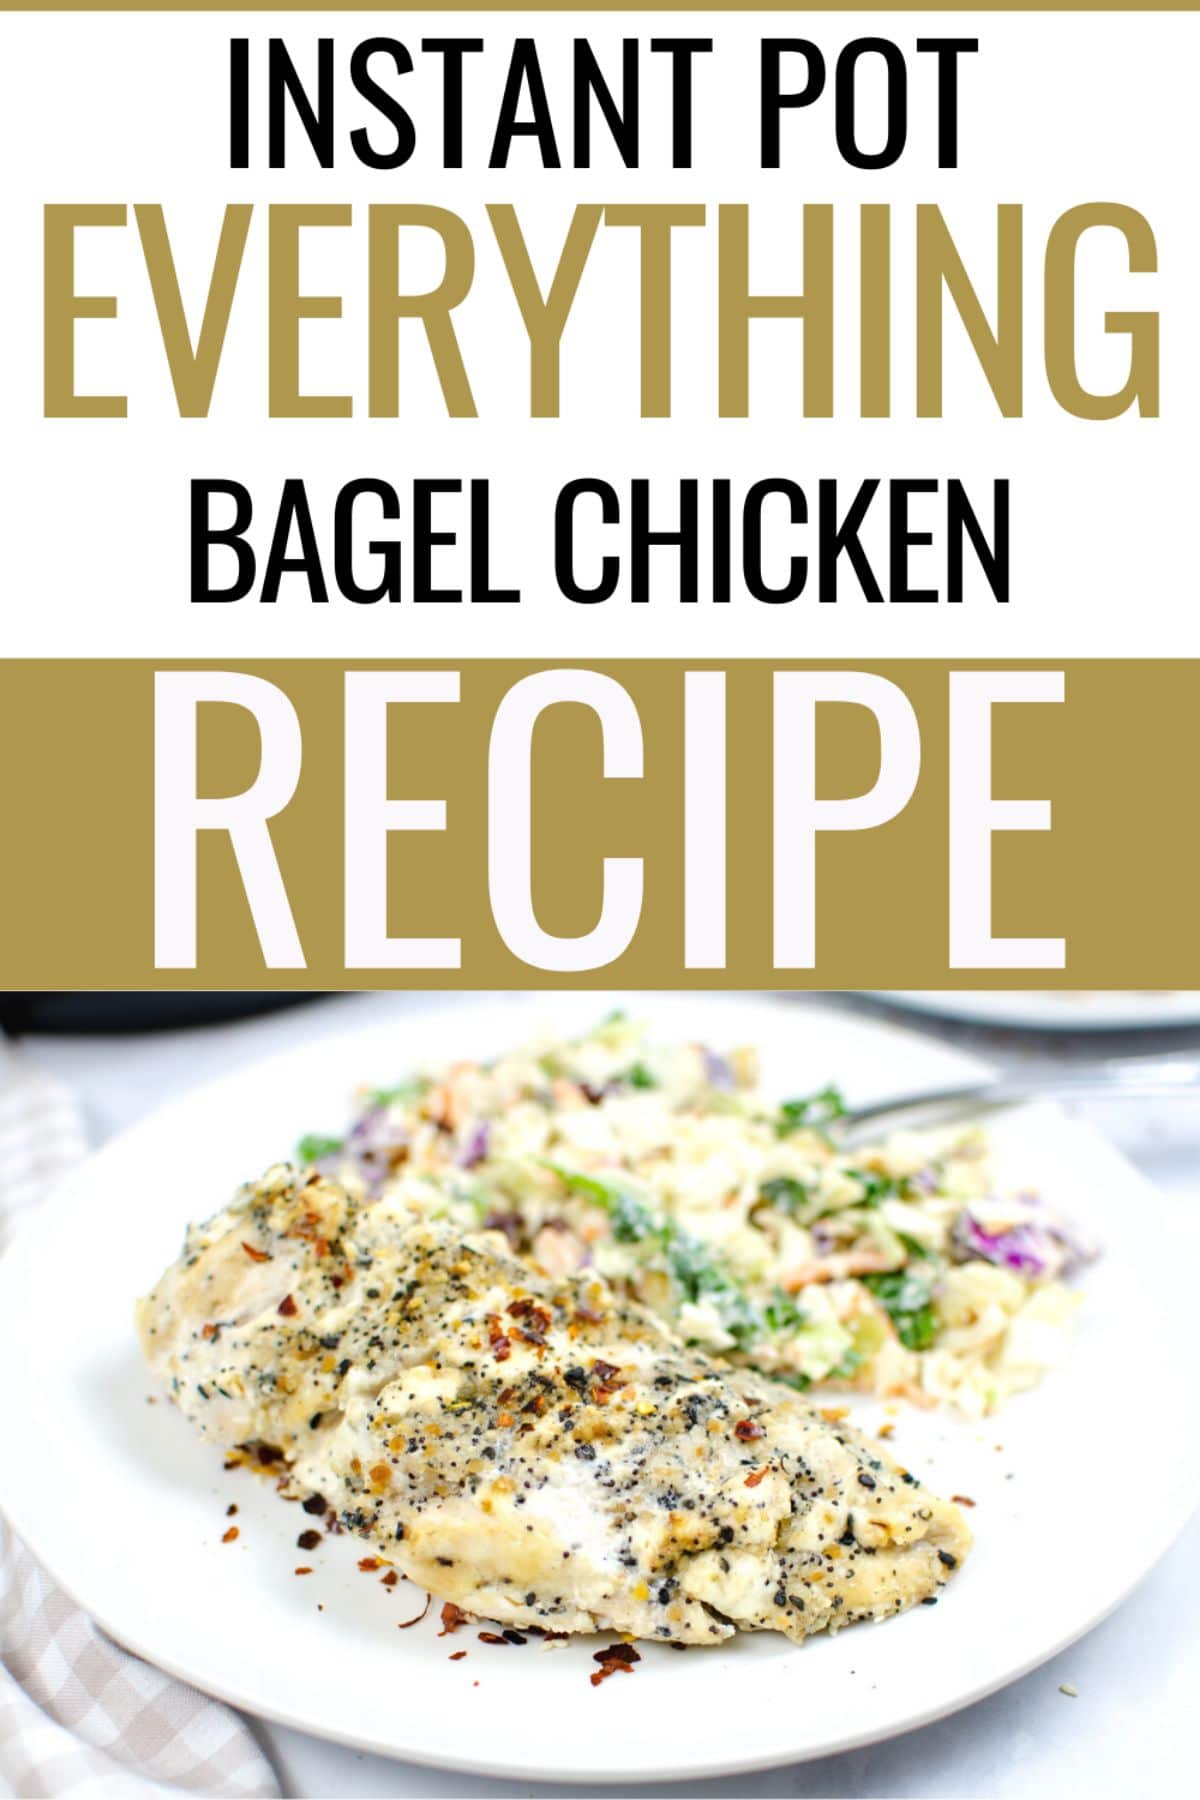 Instant Pot Everything Bagel chicken served with salad on a white serving plate and a text at the upper half of the image saying "Instant Pot Everything Bagel Chicken Recipe".